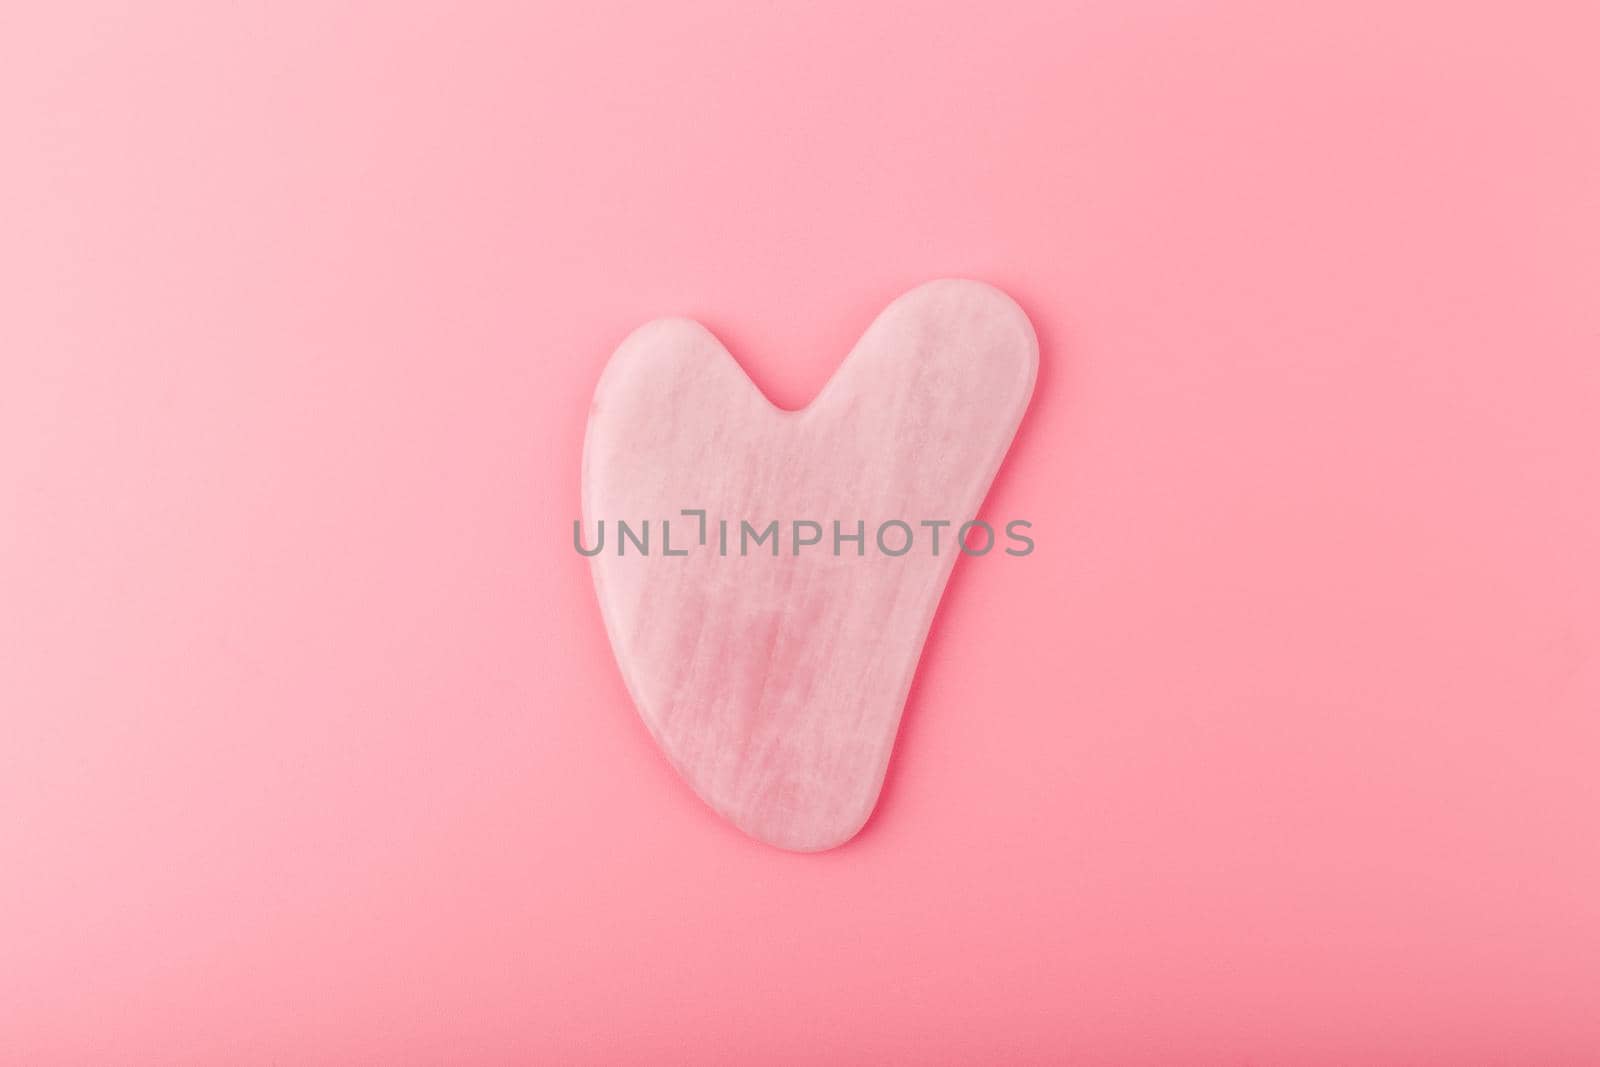 Top view of pink heart shaped guasha stone made of quartz crystal on bright pink background. Concept of alternative skin care treatment, self massage and acupressure